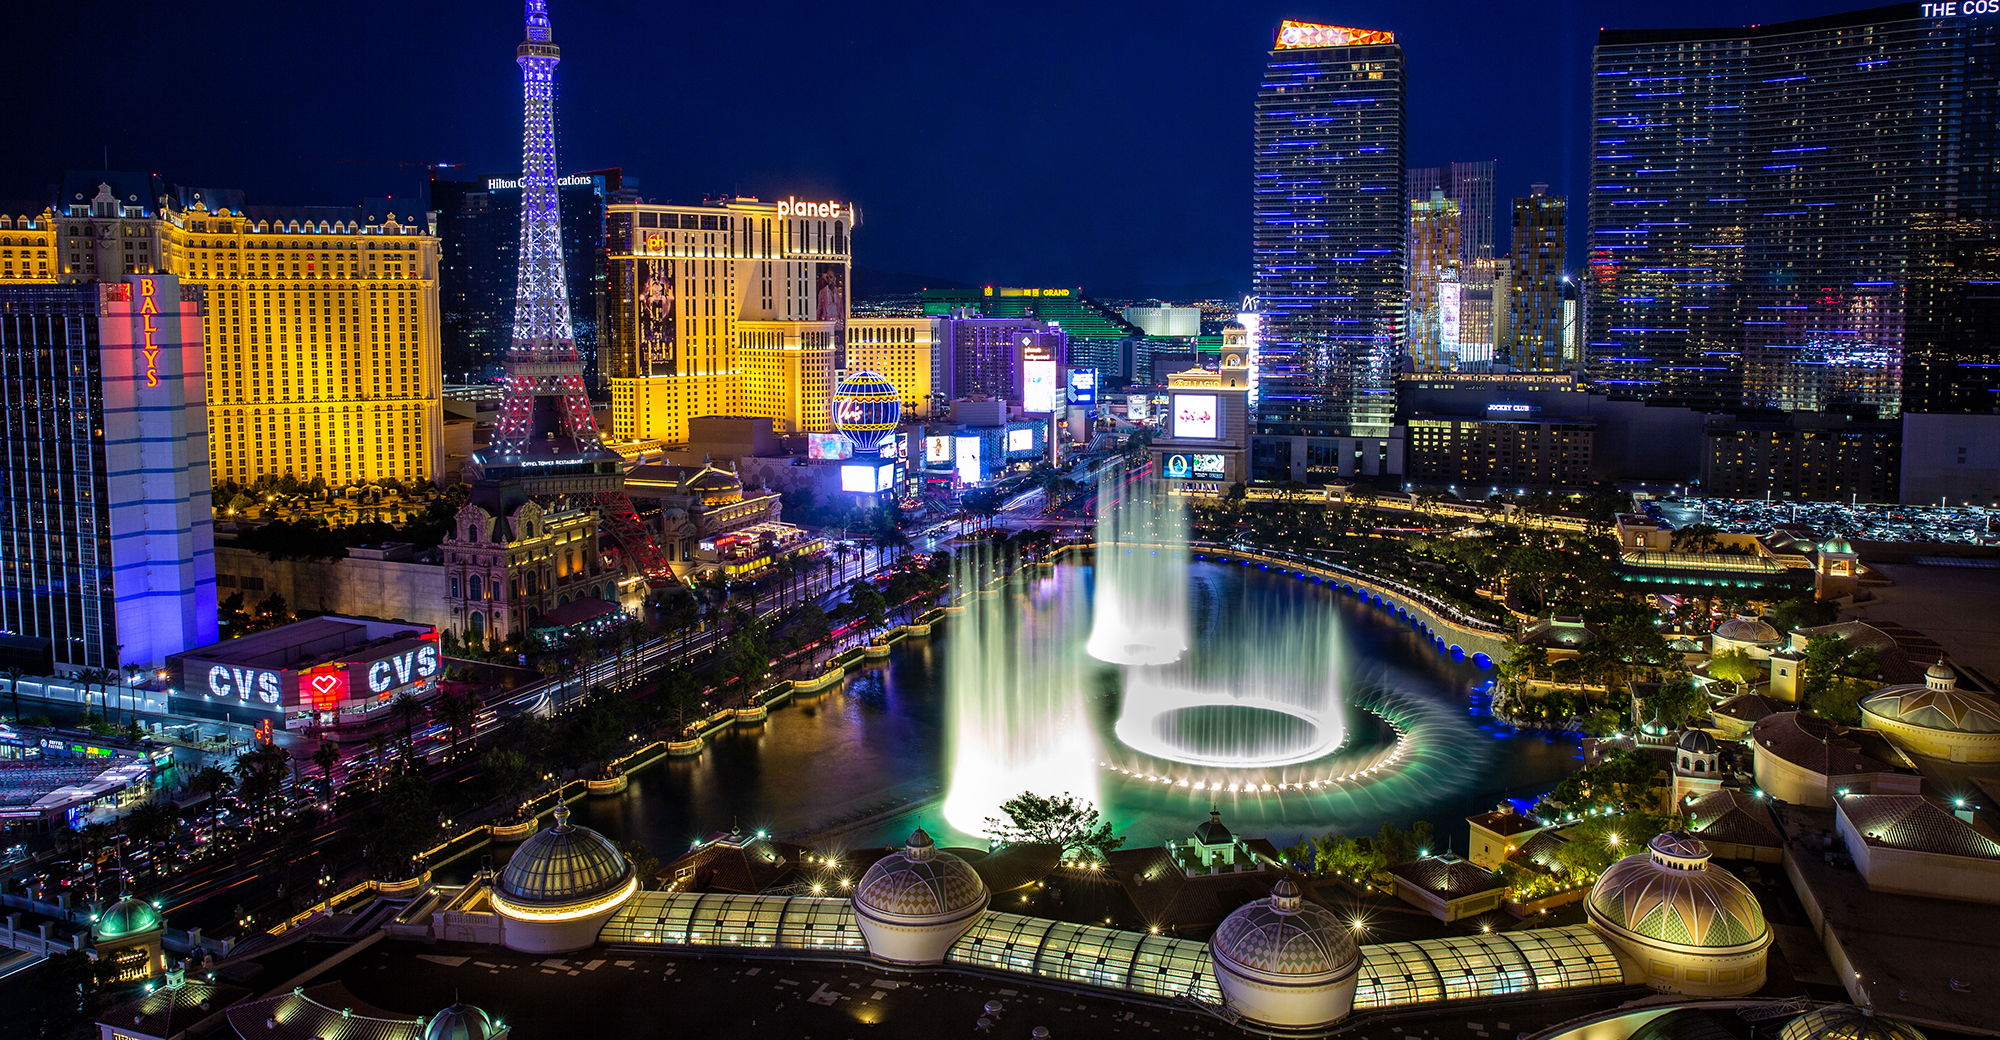 Las Vegas Bellagio Hotel Casino, featured with its world famous